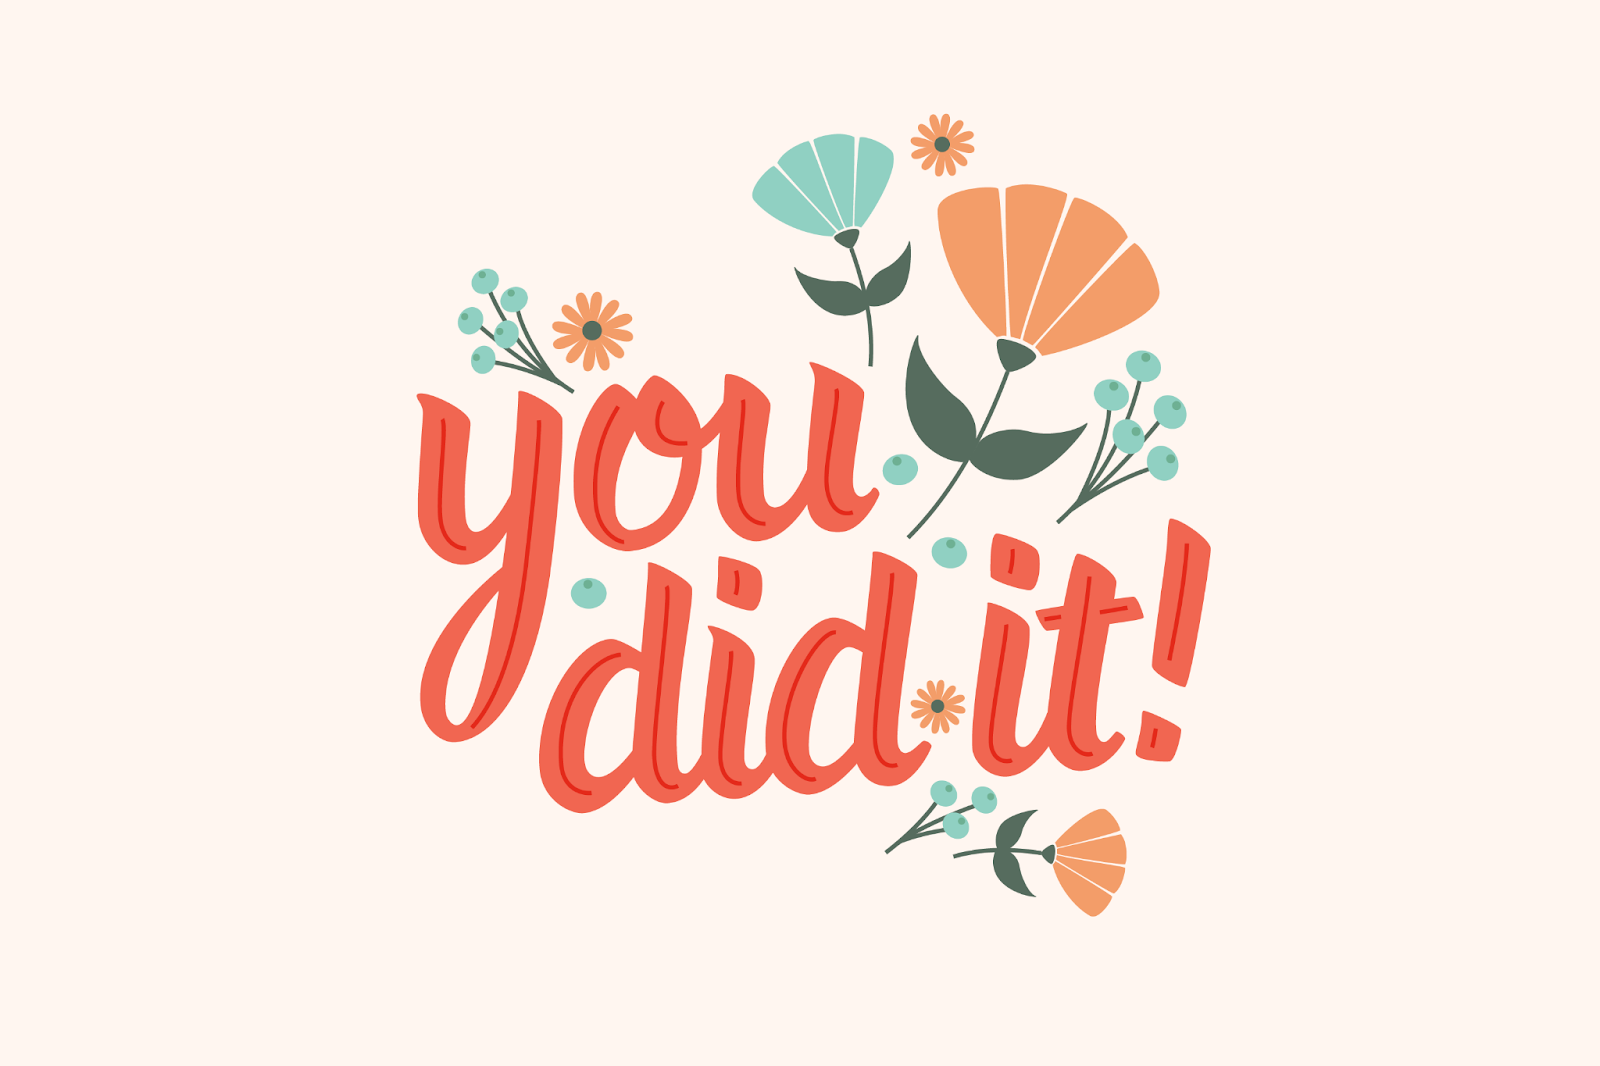 you did it!